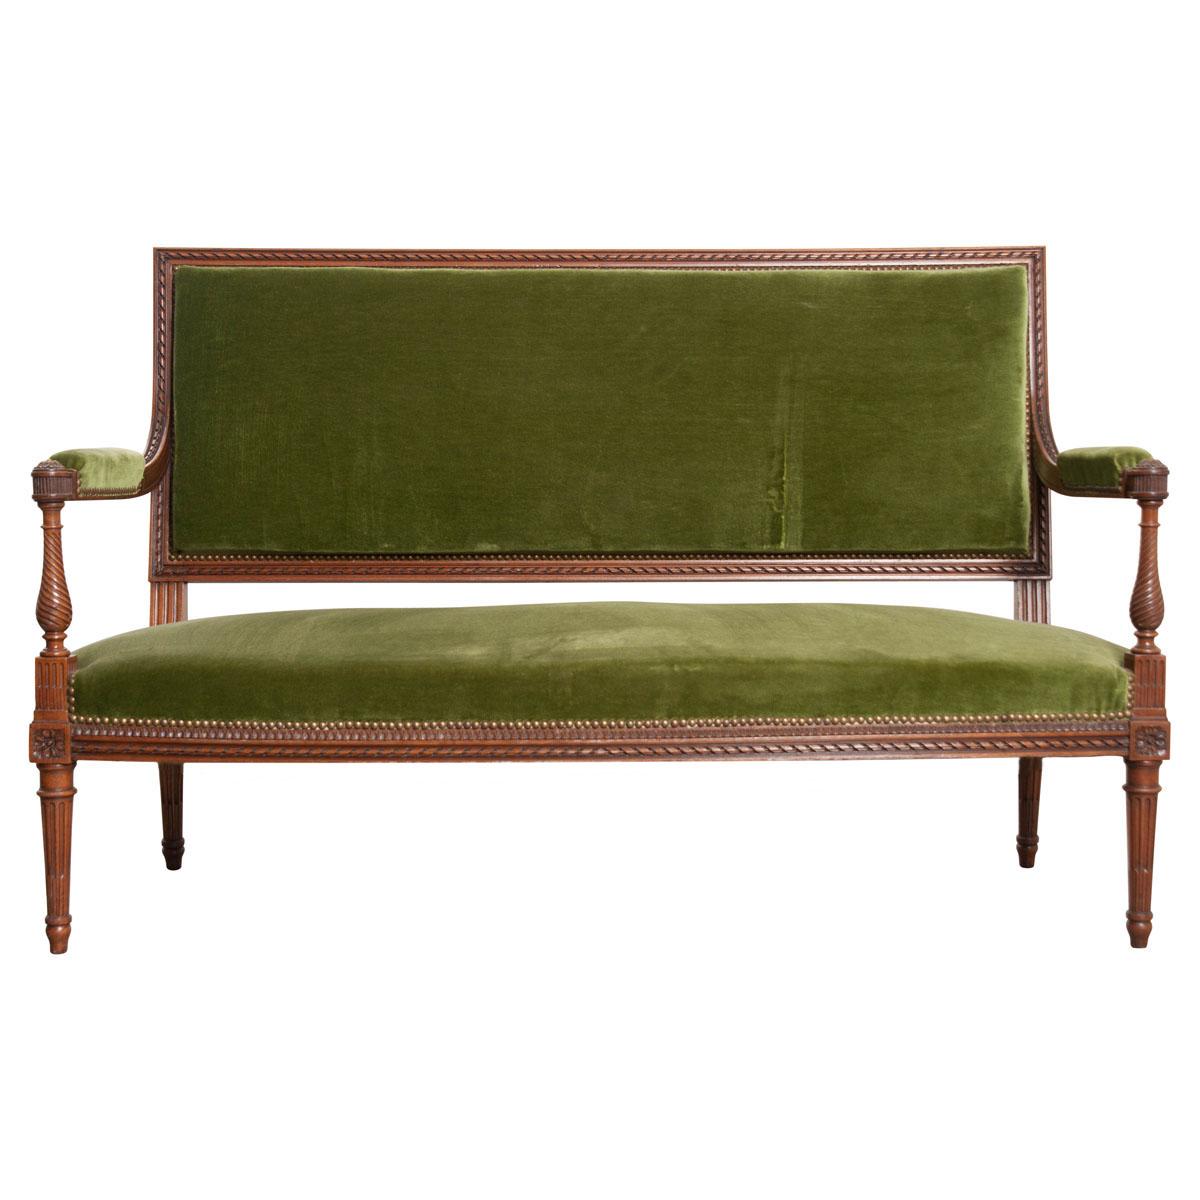 French Early 20th Century Louis XVI Style Upholstered Settee